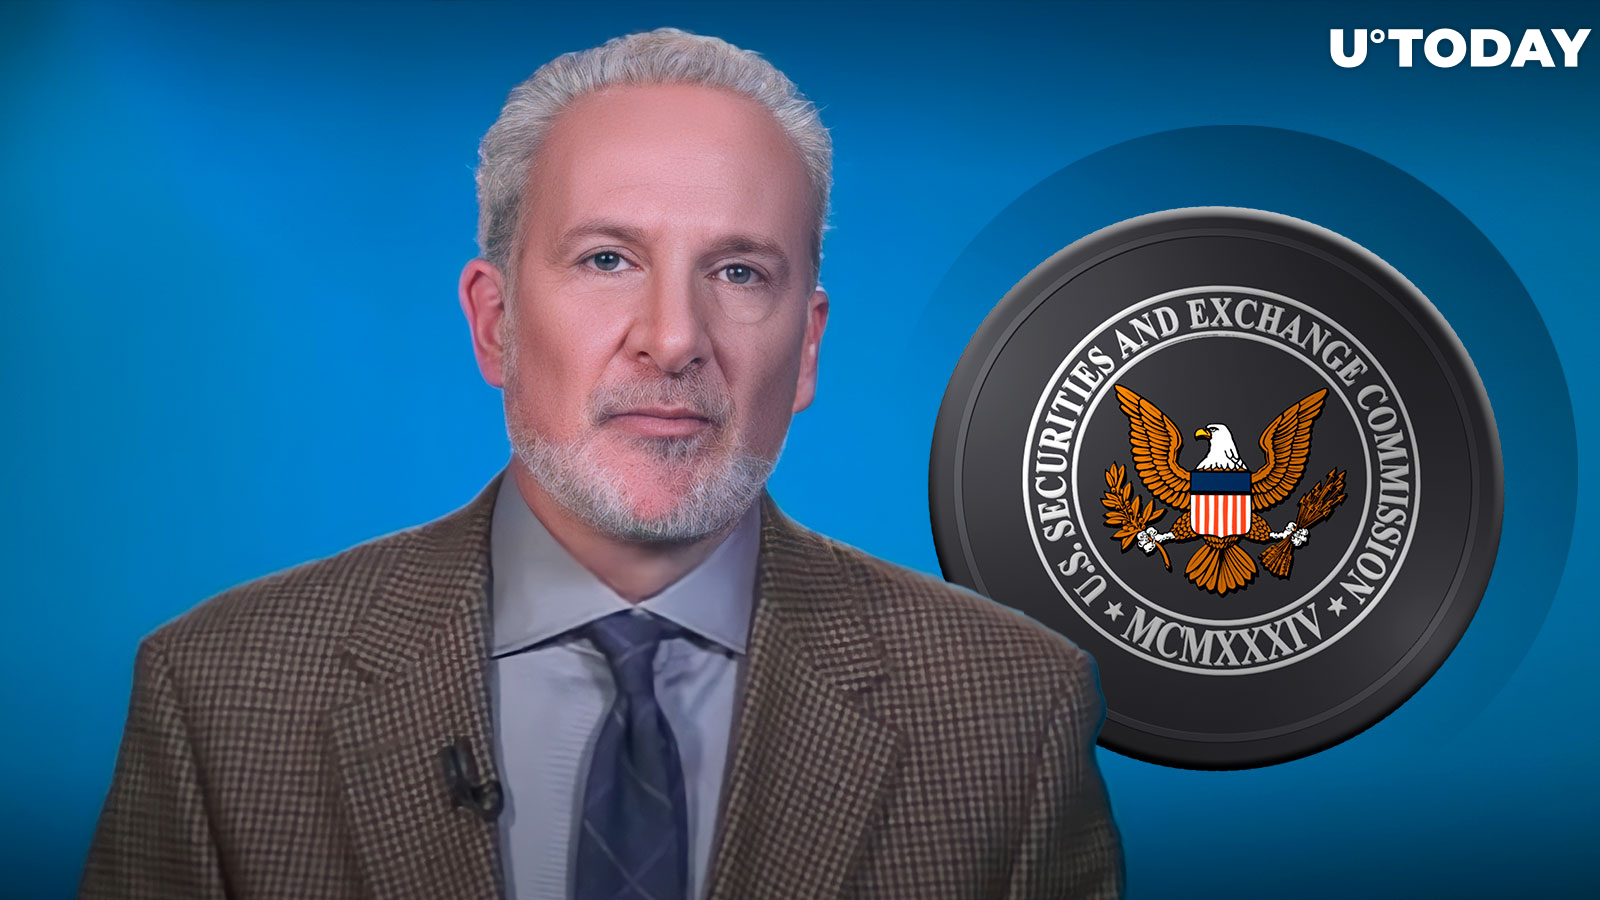 Bitcoin Critic Peter Schiff Not Happy With New SEC Rules